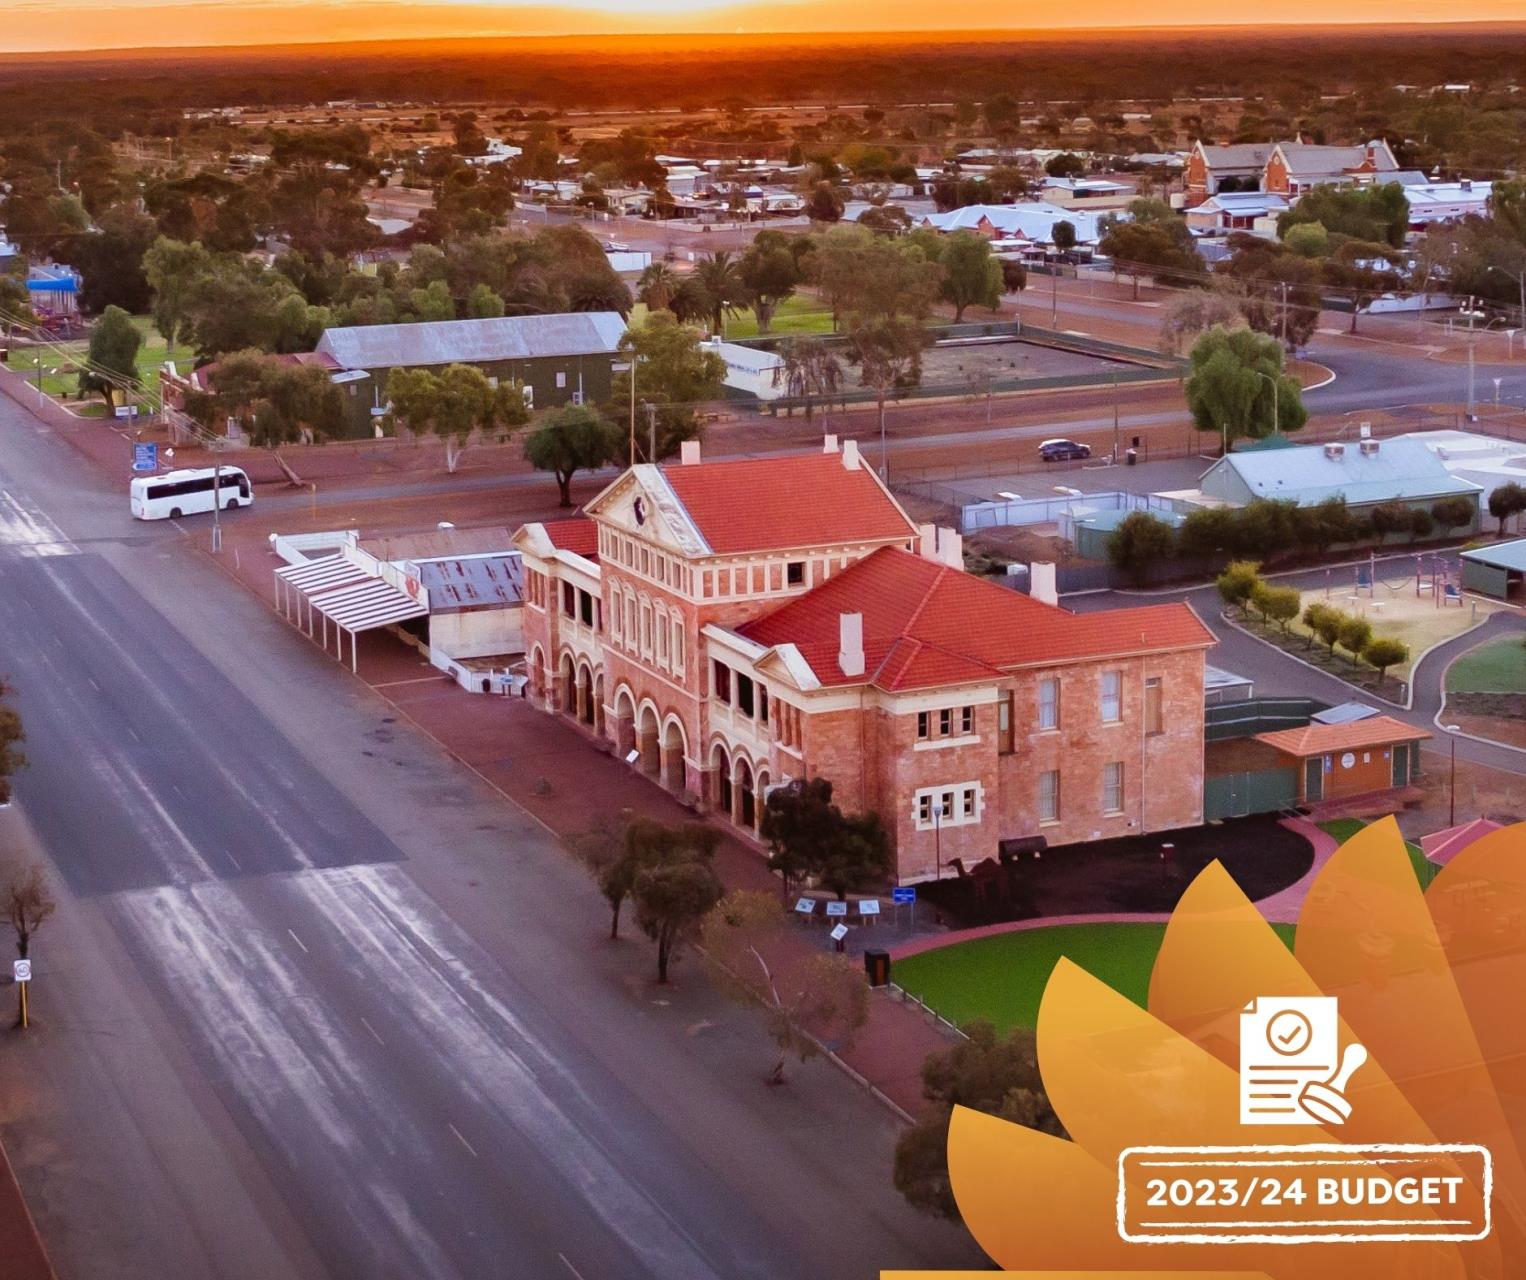 Shire of Coolgardie Presents 2023/2024 Budget: Addressing Rising Costs